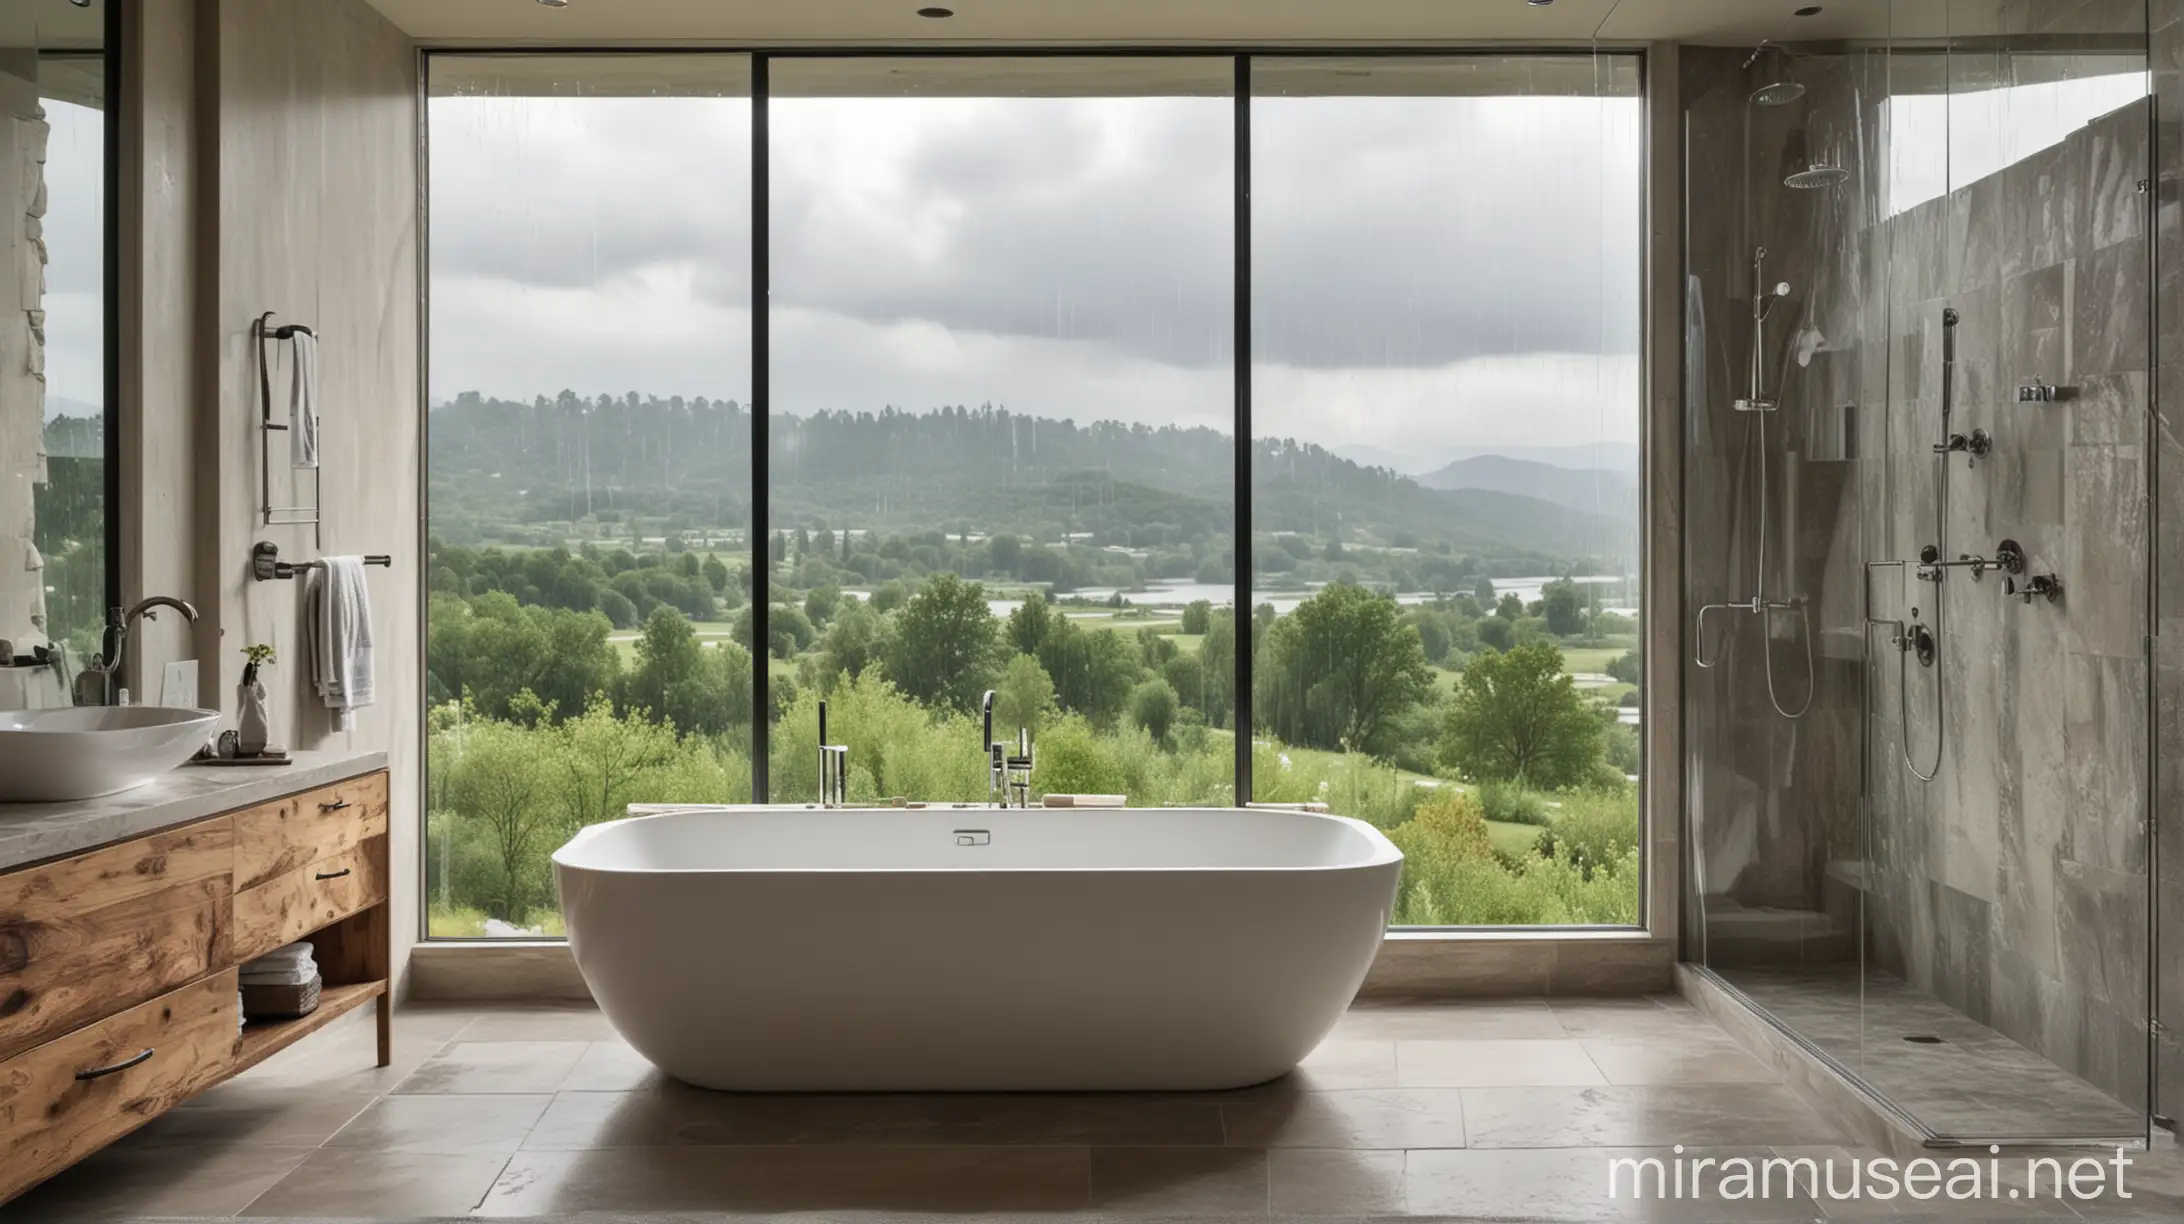 A bathroom with a large, floor-to-ceiling window overlooking a scenic view. The bathroom features a freestanding bathtub and a shower with a rain showerhead.